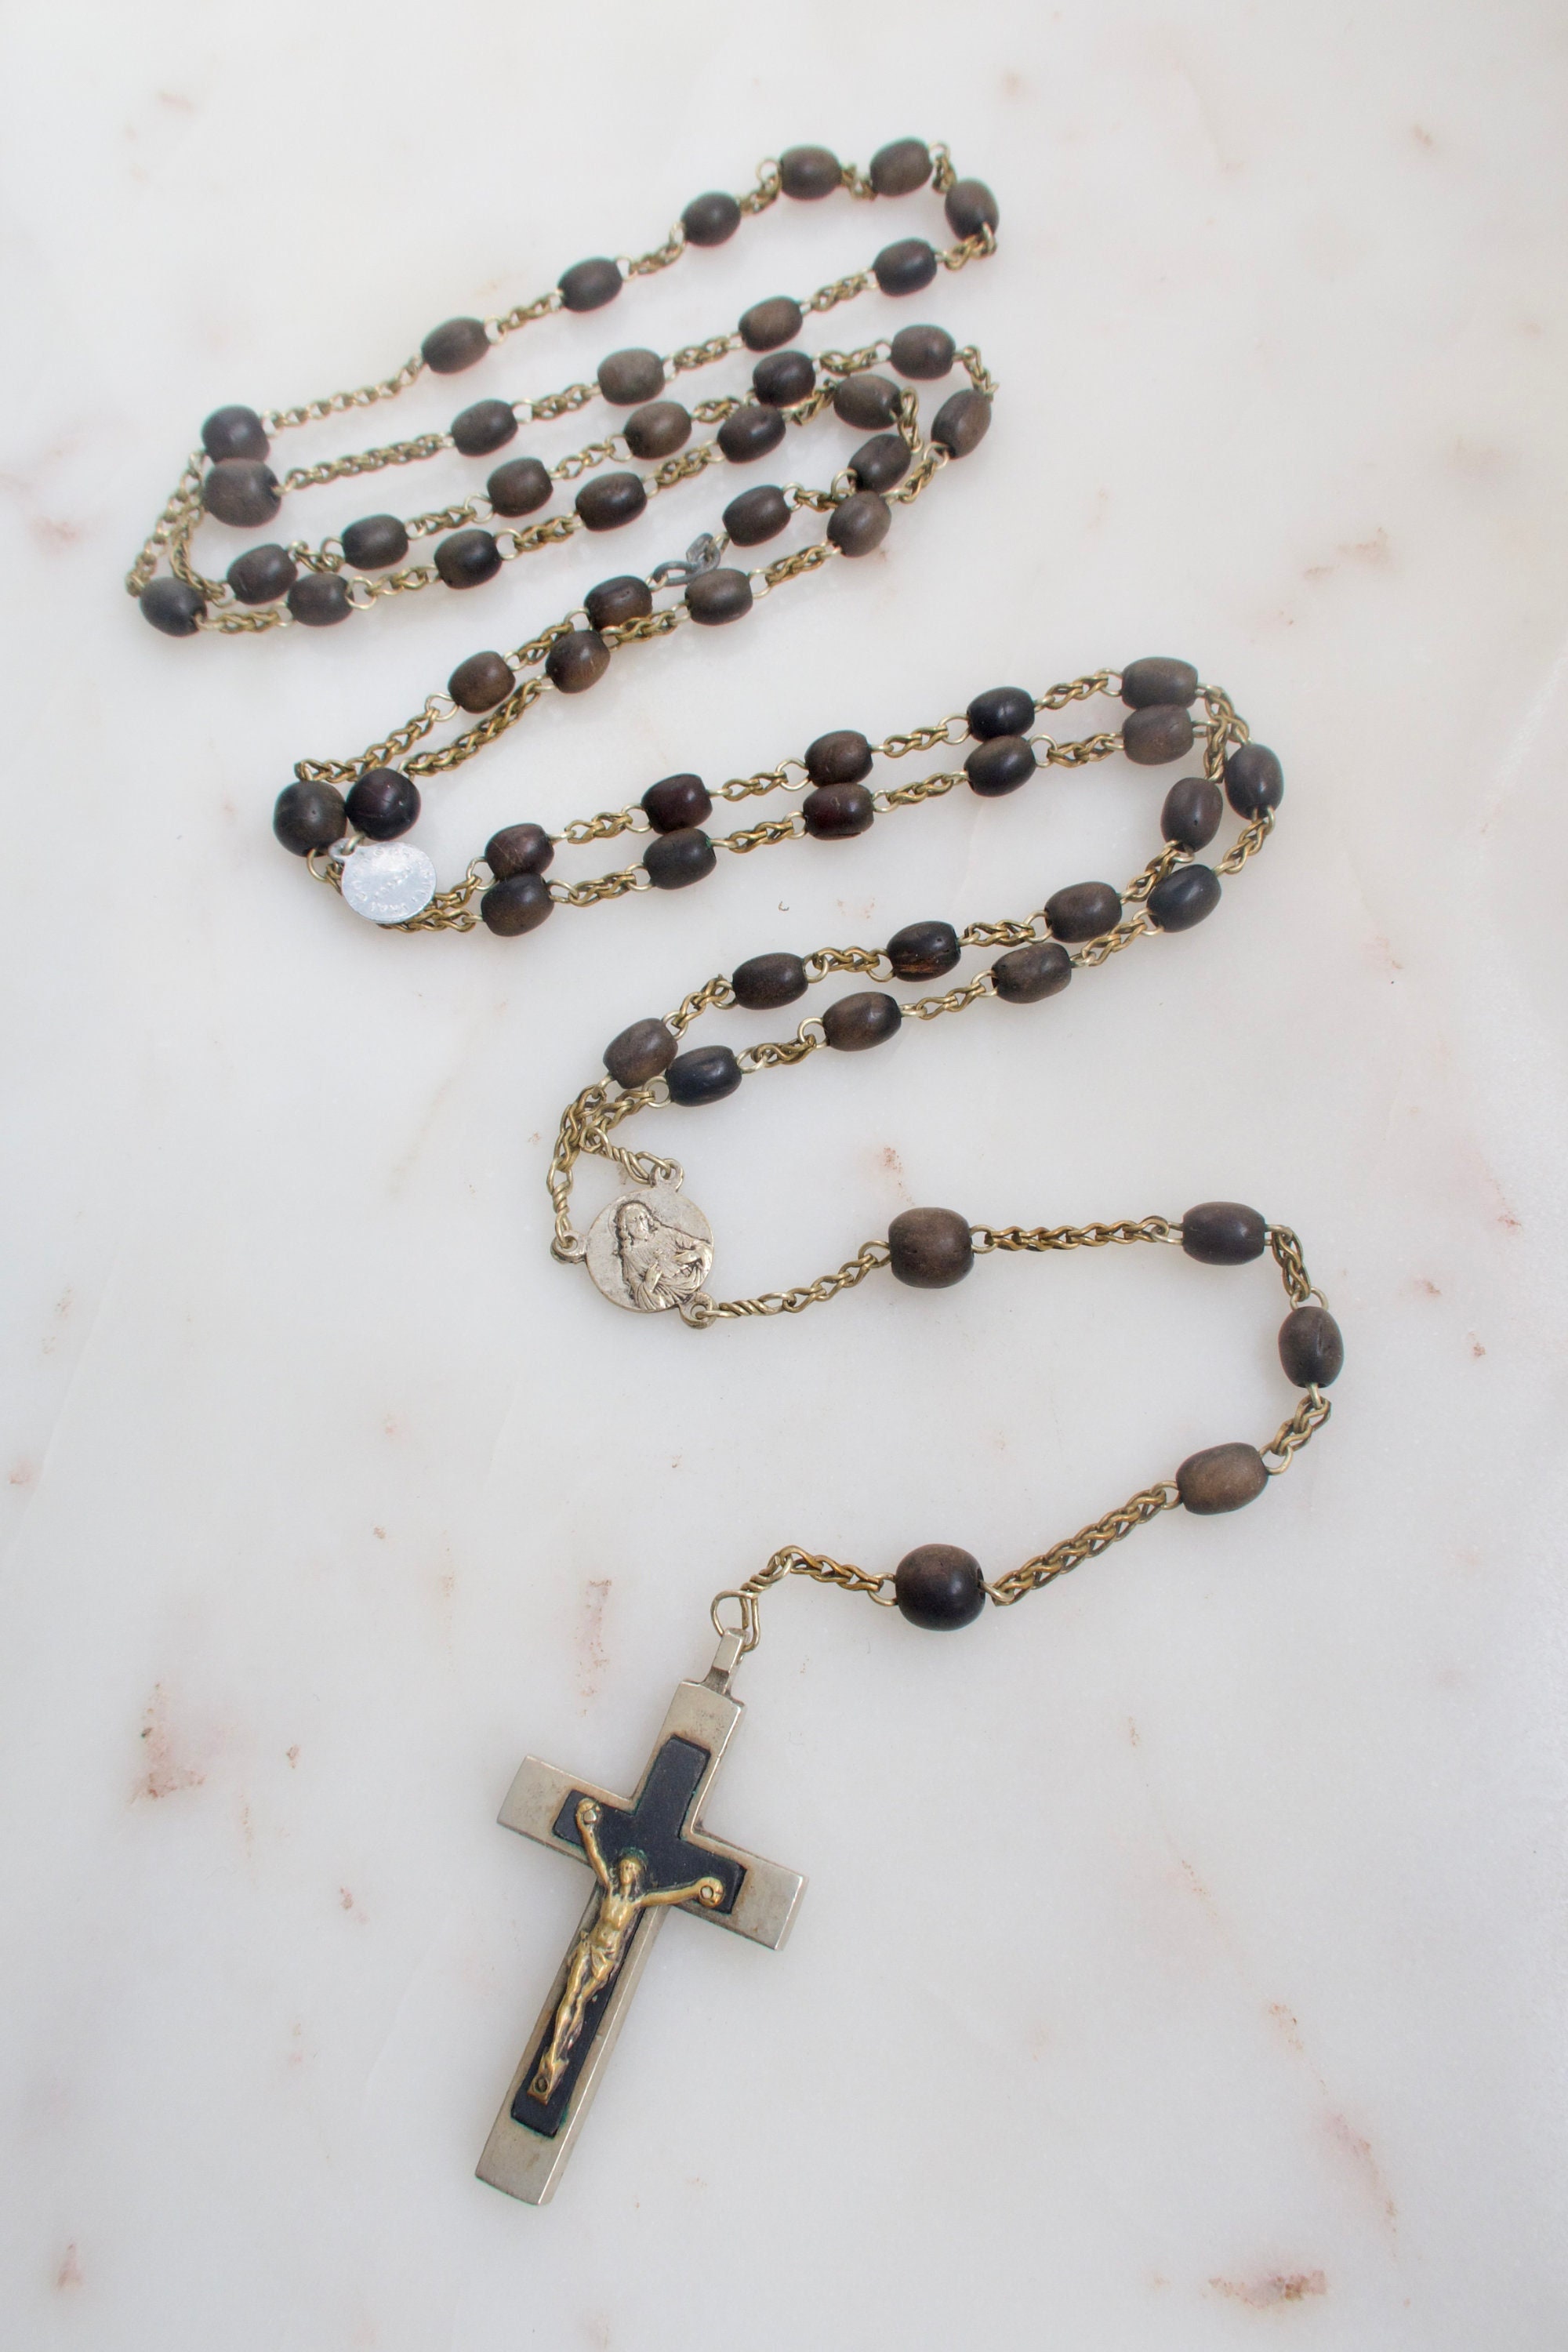 Classic Natural Wood Beads Cross Pendant Necklace for Men Women Religious Rosary Jewelry Handmade Prayer Accessories 